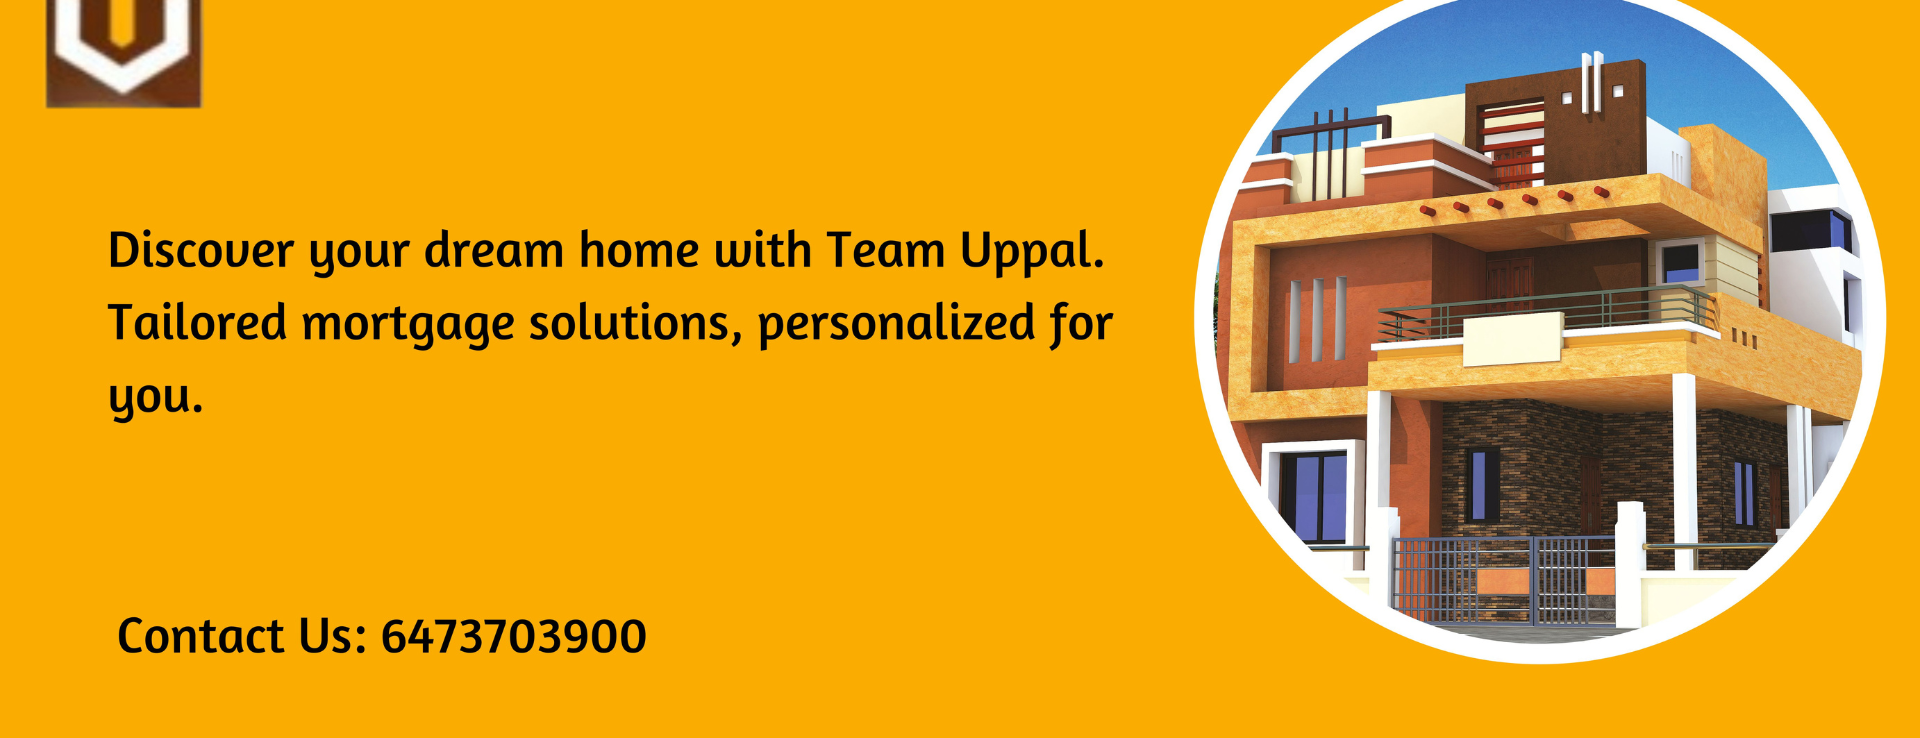 Team uppal - Mortgage agents / other from Mississauga / Background